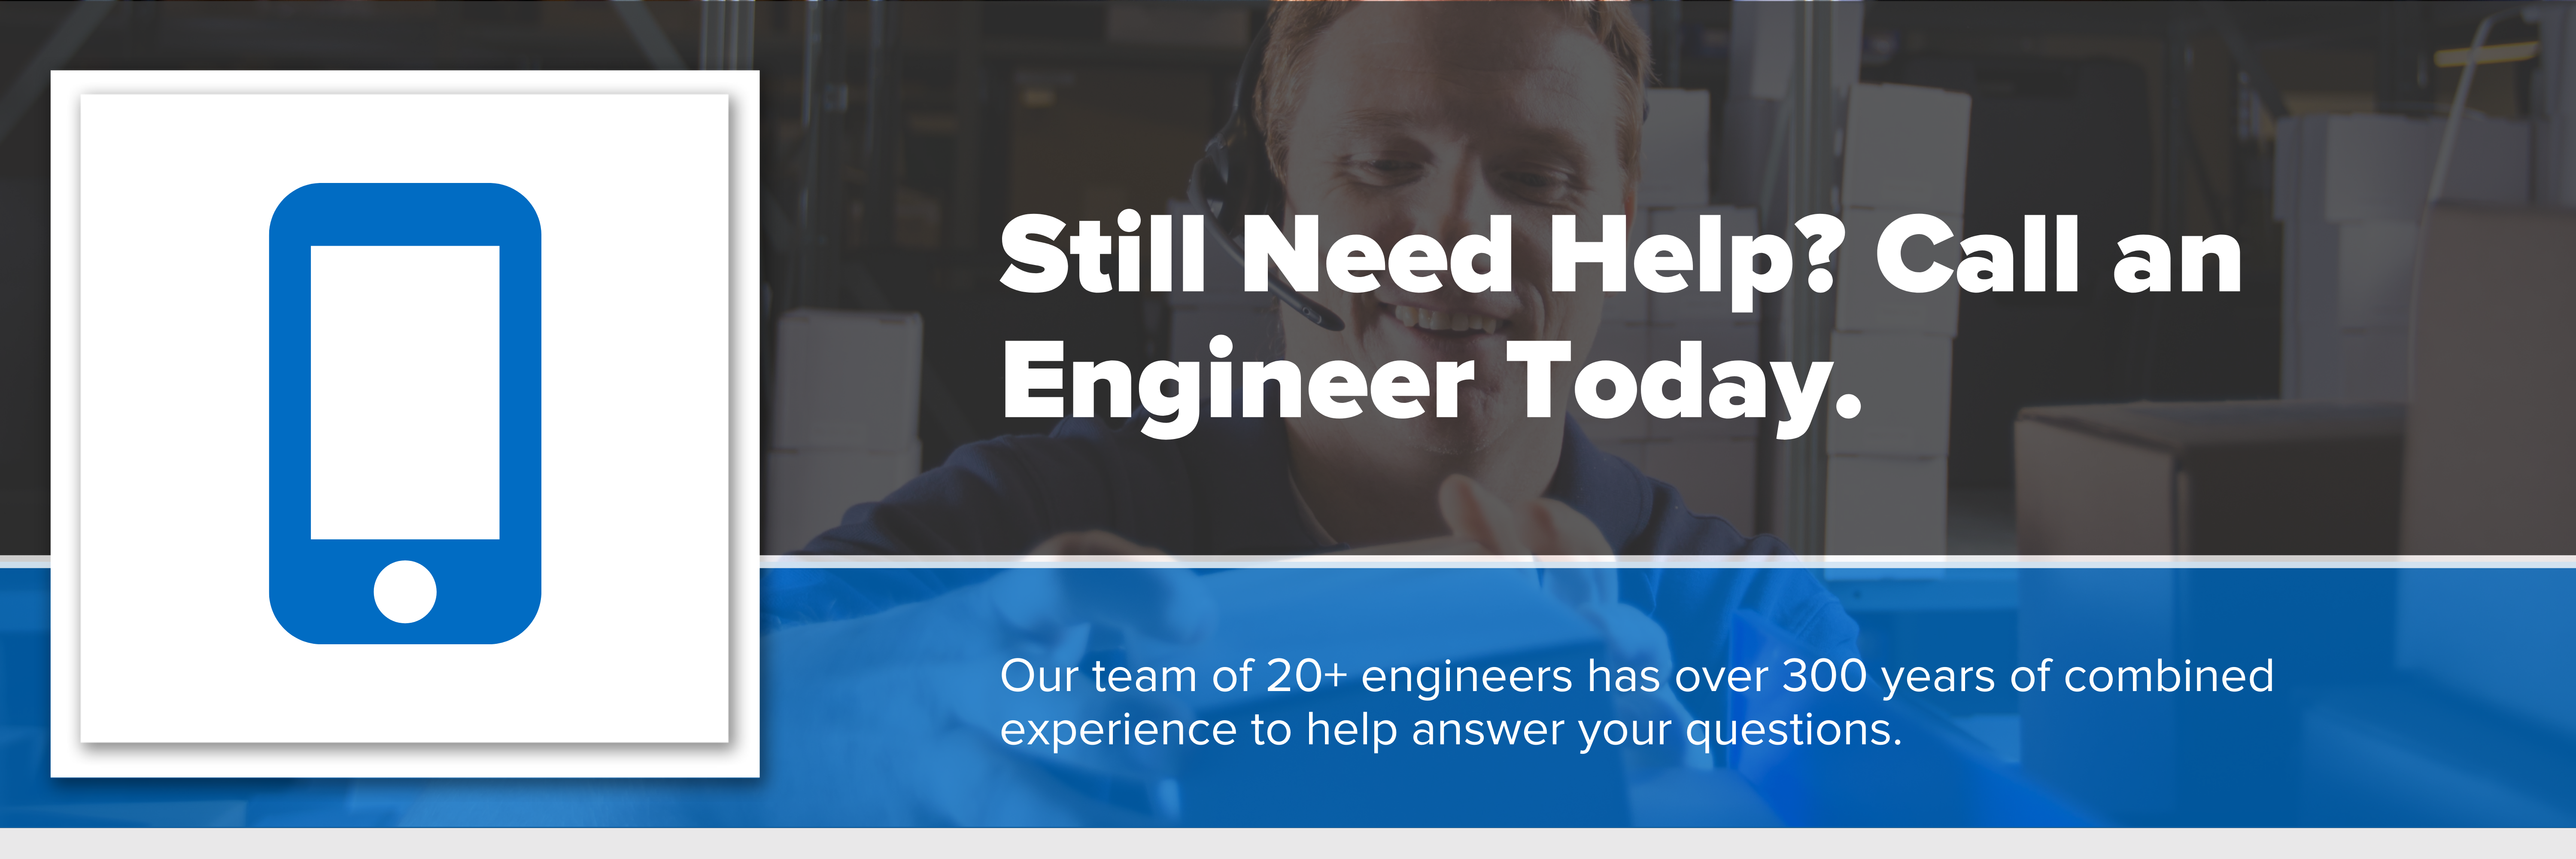 Header image with text "Still Need Help? Call an Engineer Today"